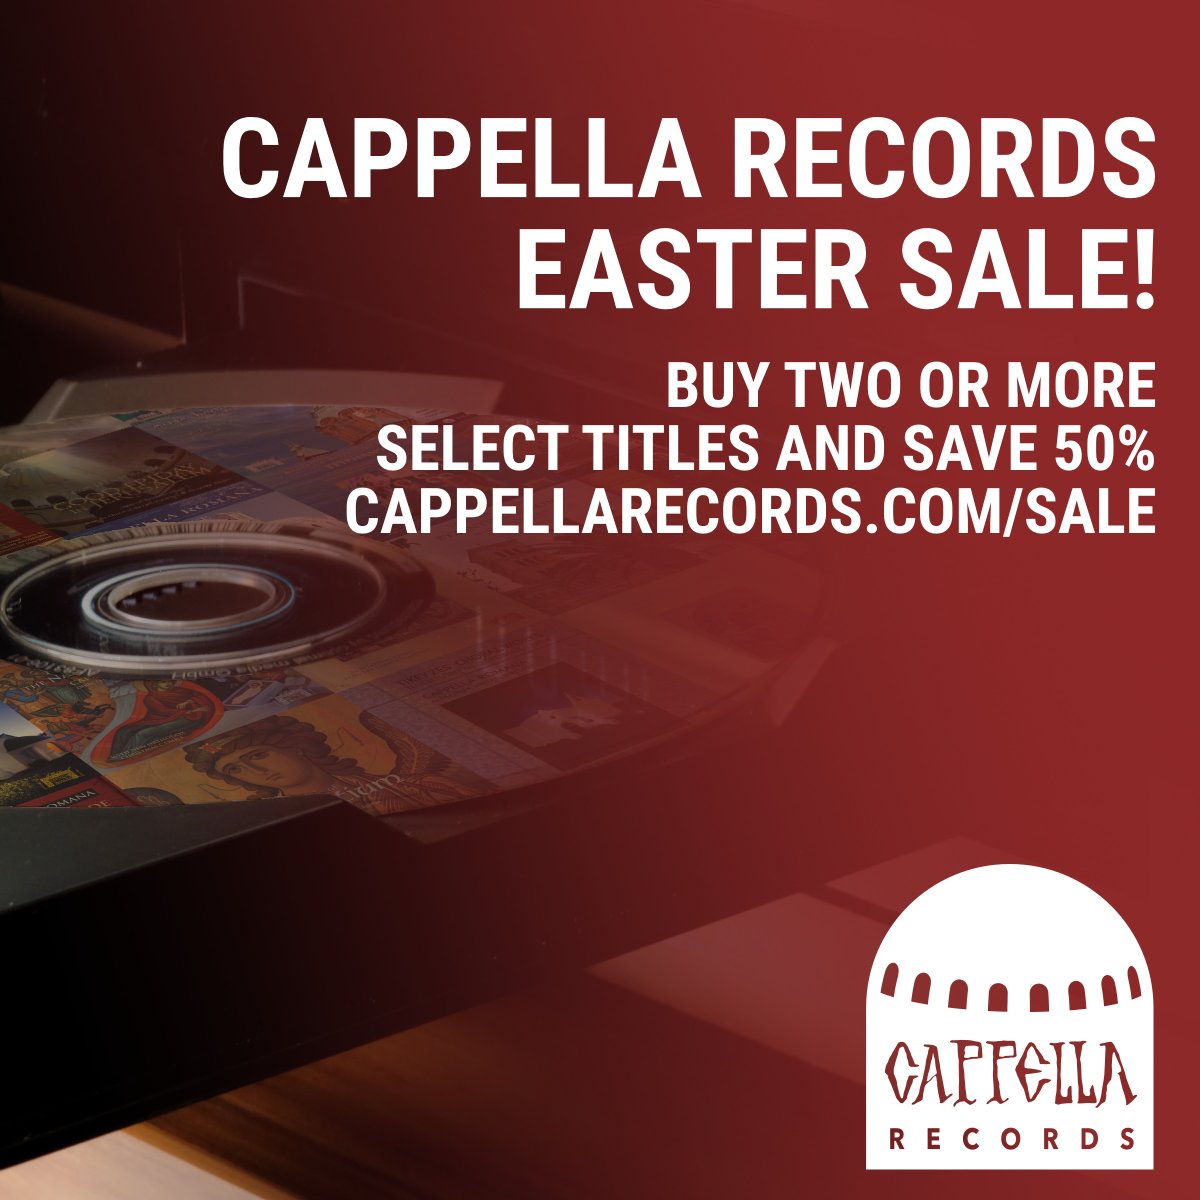 Now through May 5, save 50% on select #CappellaRecords titles when you purchase two or more! The perfect opportunity to stock up on some of our most in-demand titles — the more you buy, the more you save! Explore the sale today: cappellarecords.com/sale